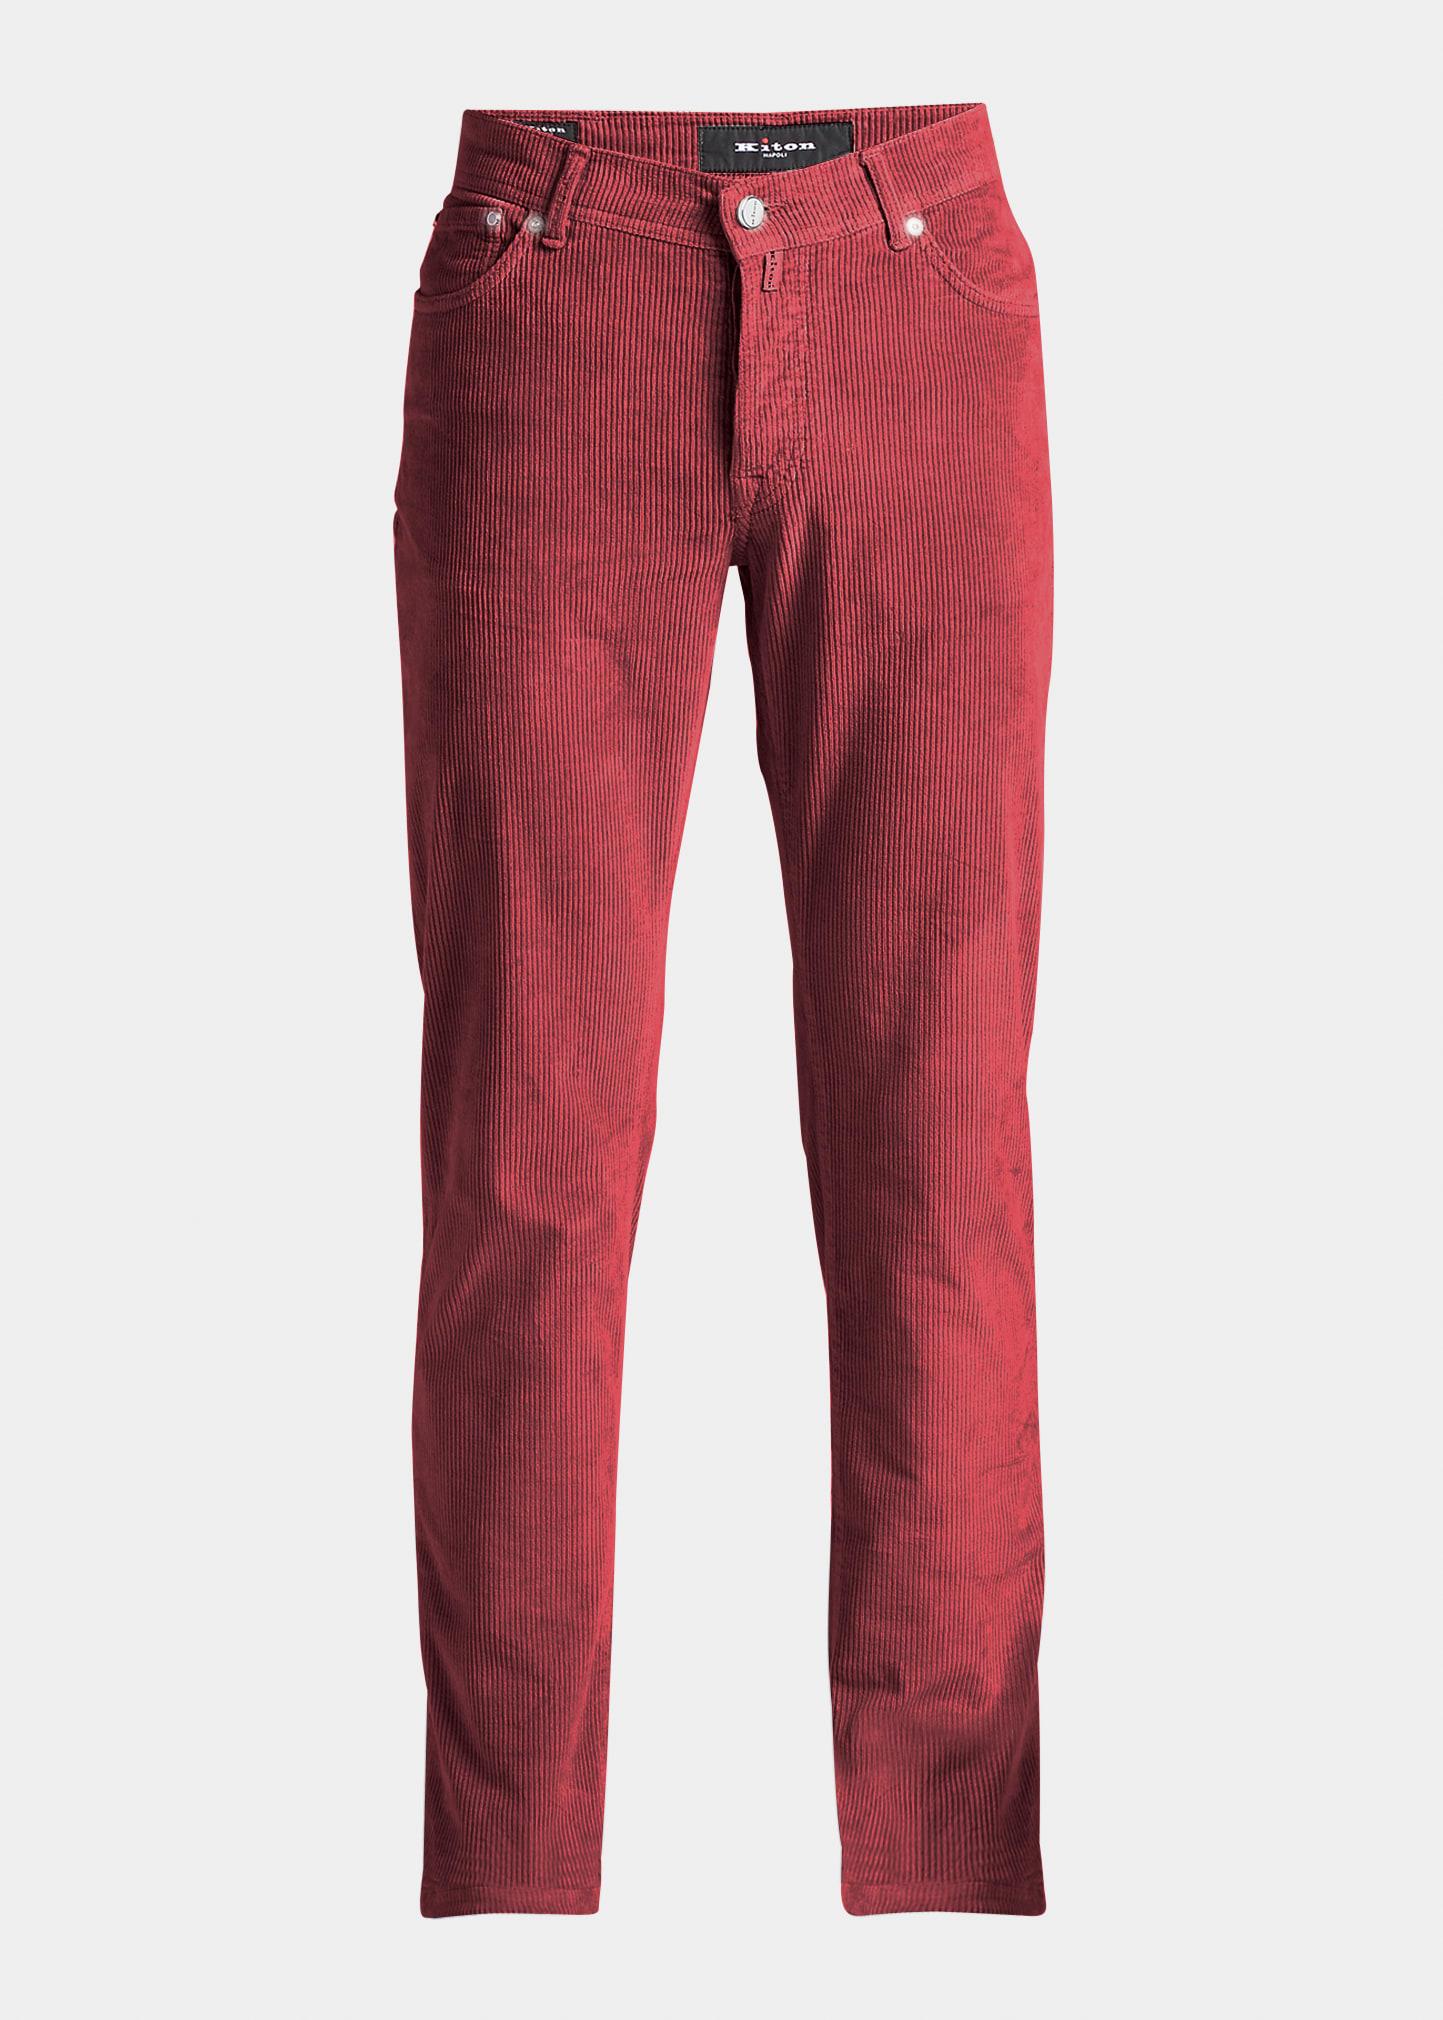 Kiton 5-pocket Cotton-cashmere Corduroy Trousers in Red for Men